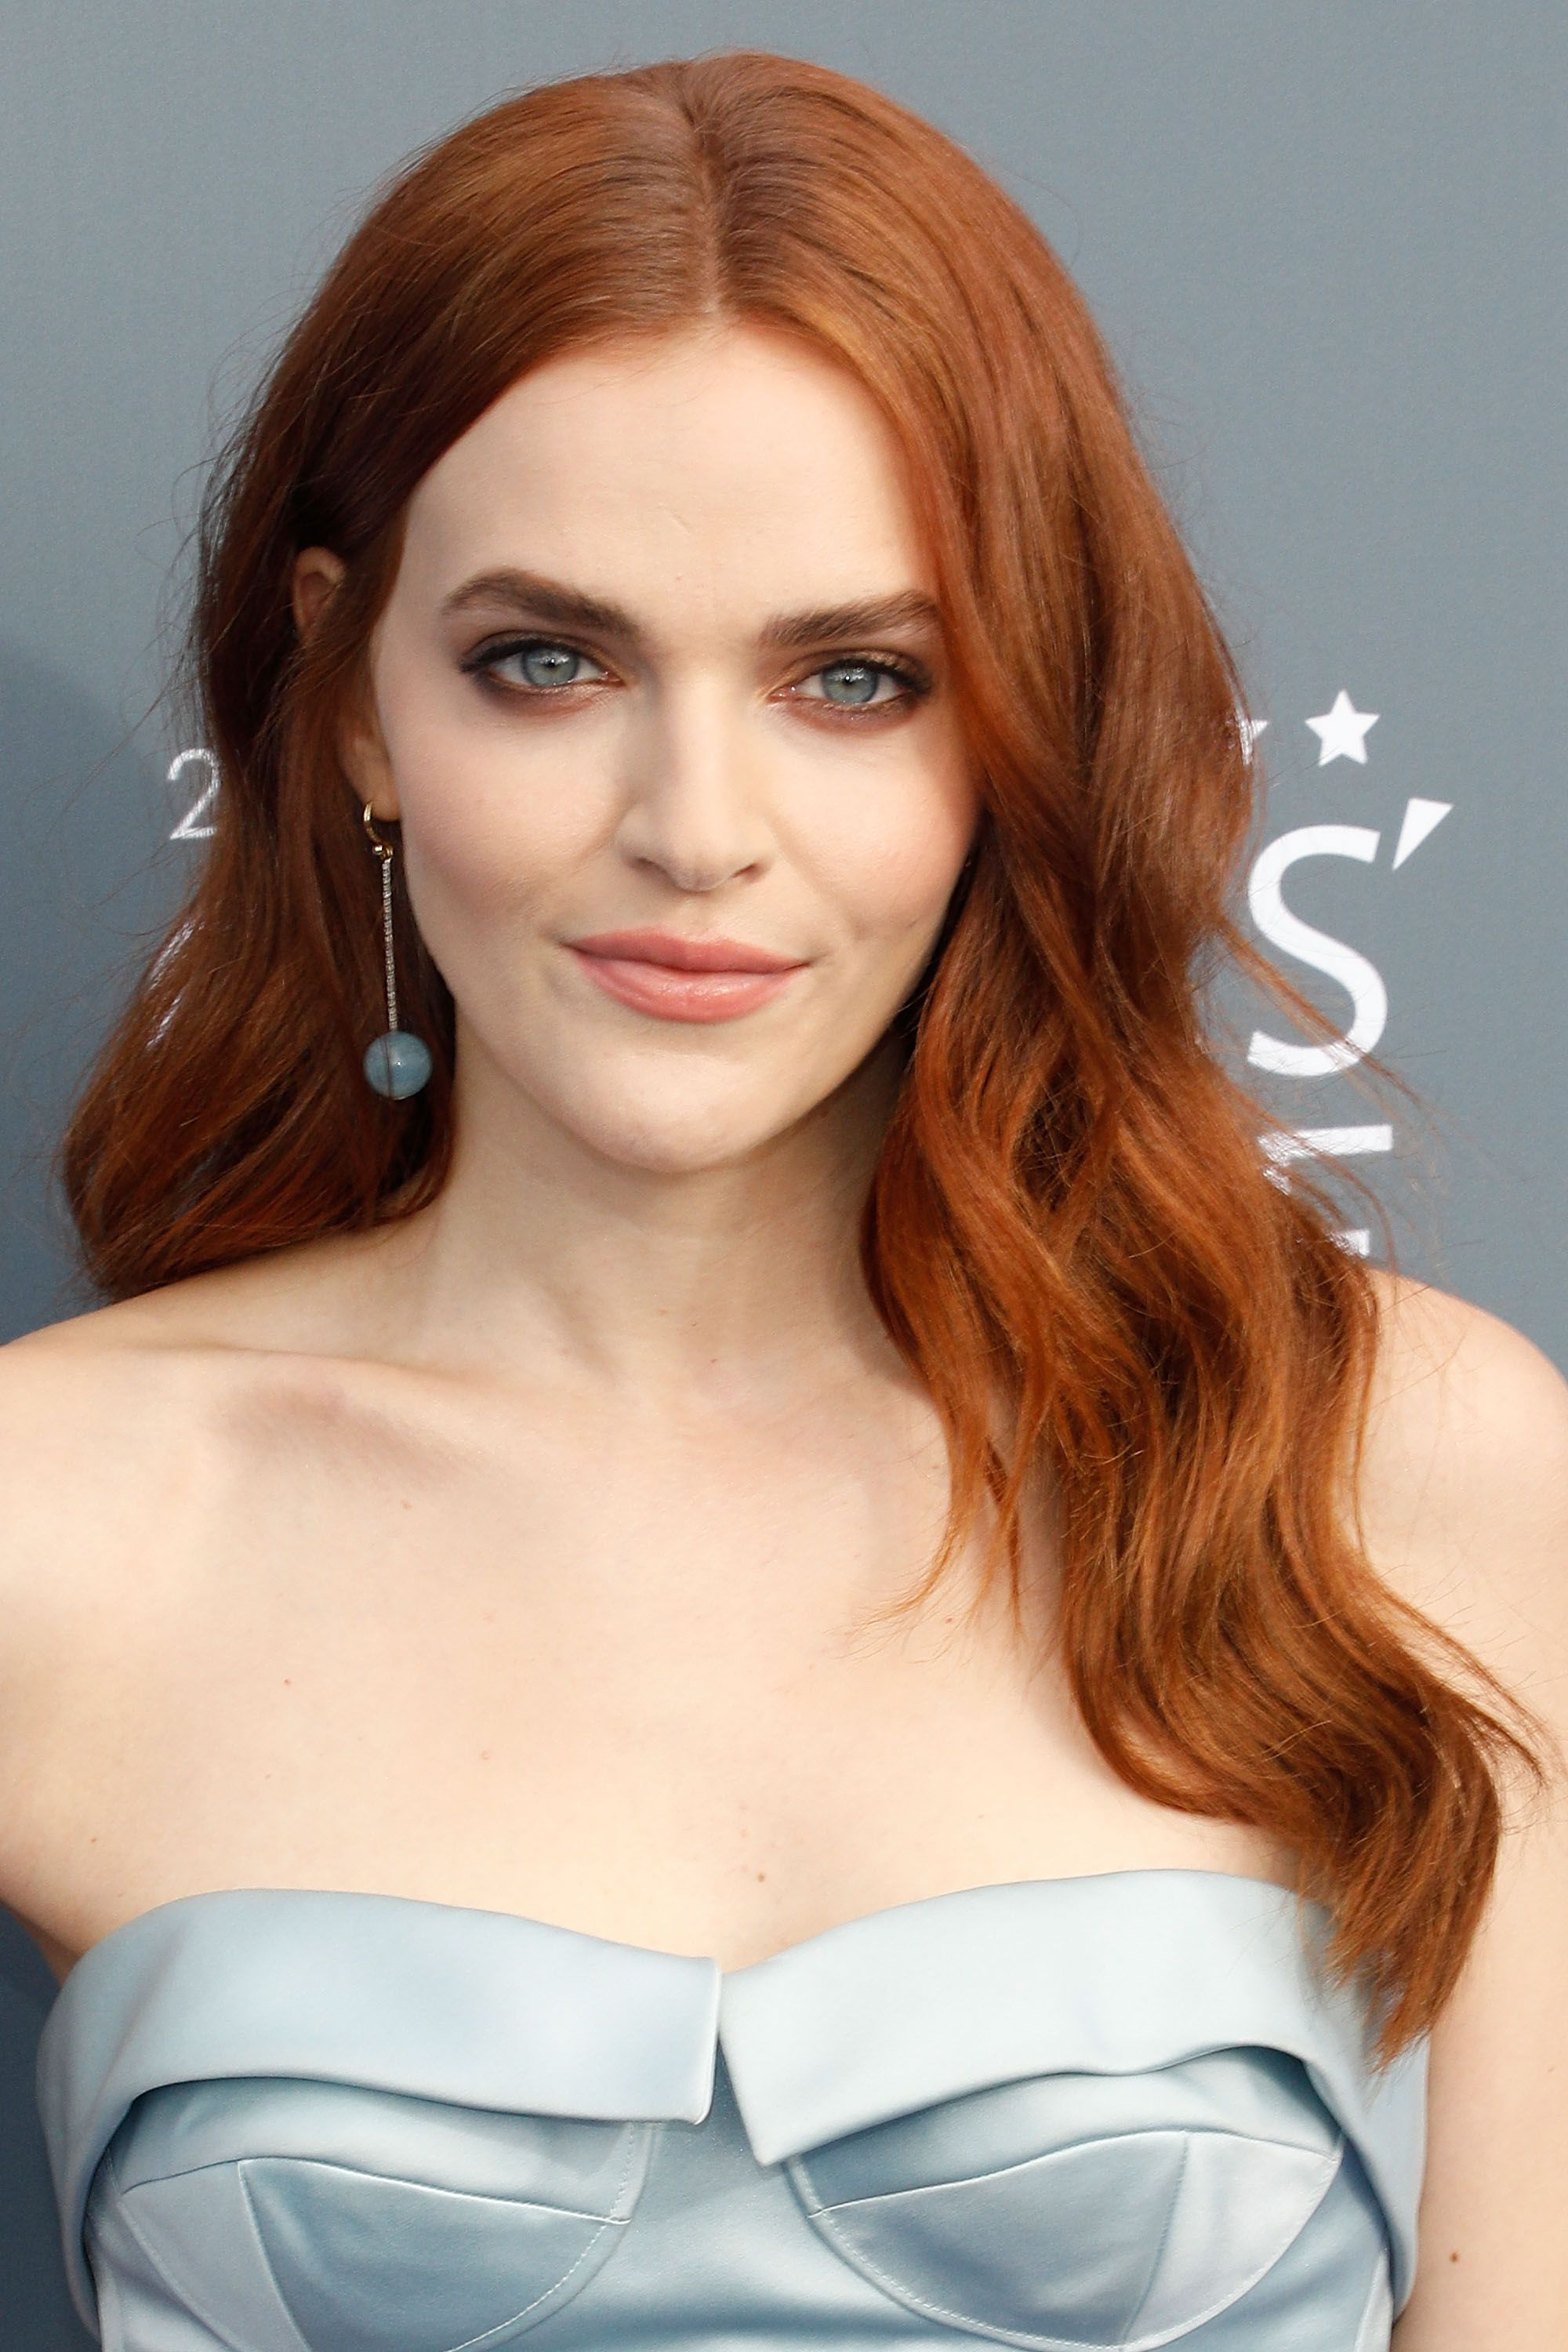 Makeup For Red Hair And Brown Eyes 30 Red Hair Color Shade Ideas For 2019 Famous Redhead Celebrities